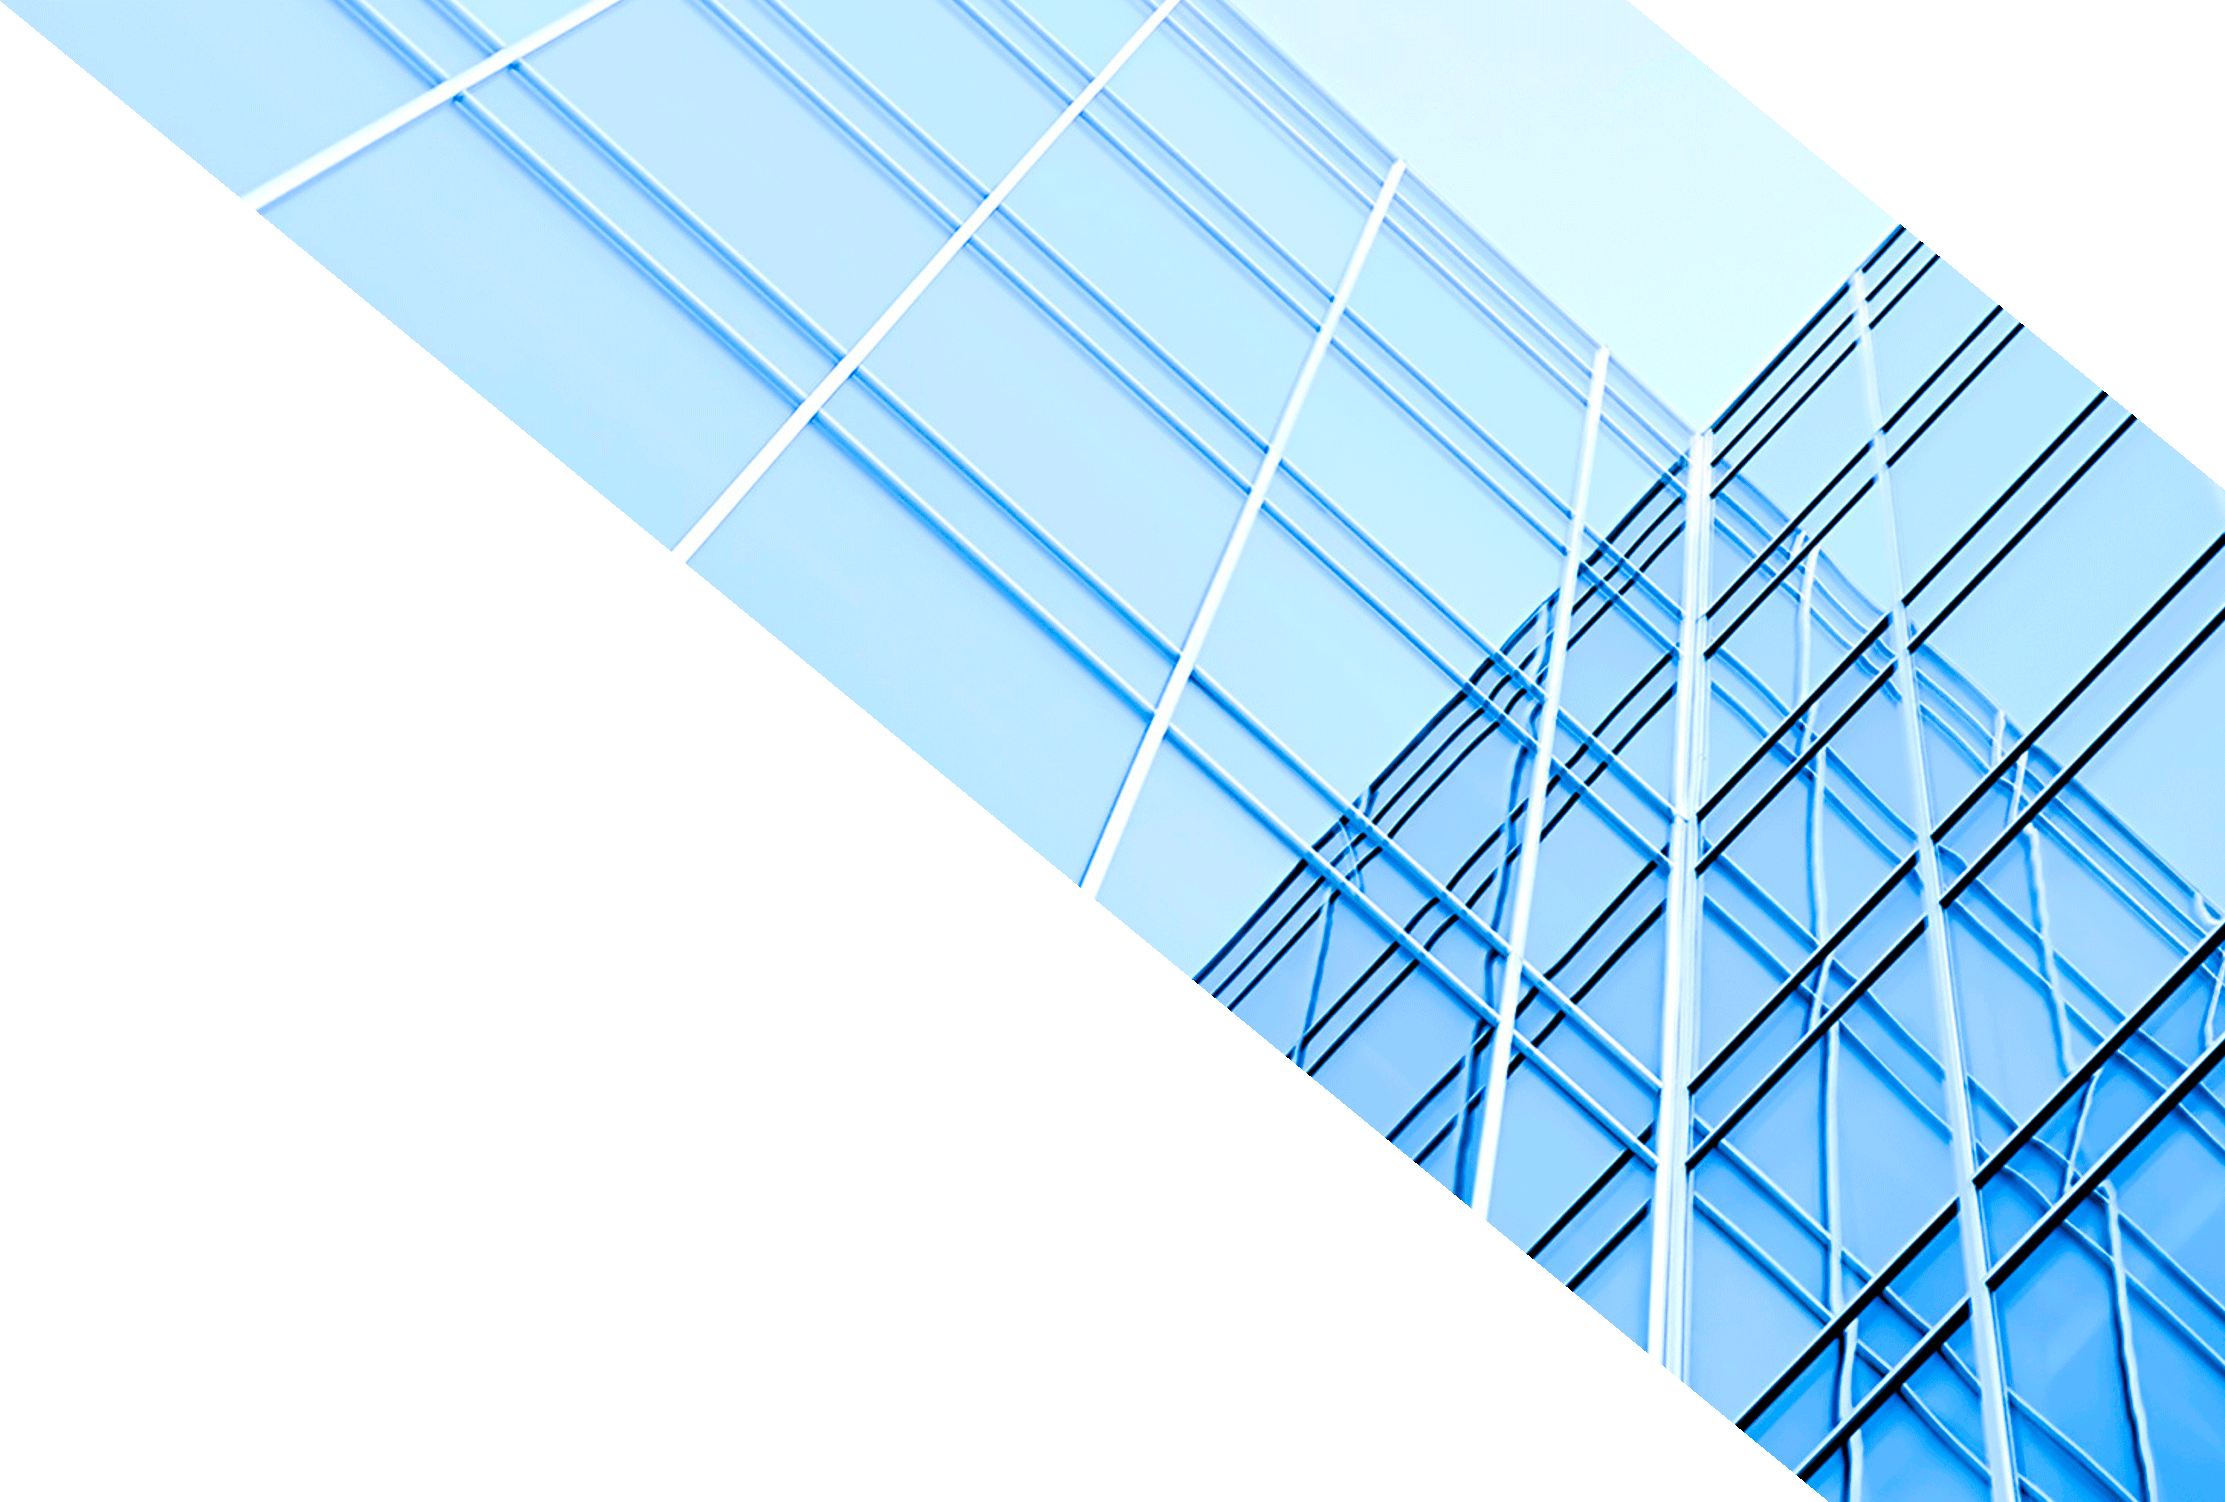 Close-up of the top of a glass skyscraper against the sky, representing towering heights in the financial landscape, possibly pertinent to discussions on Issuer Services and consulting with Abandoned Property Advisors.